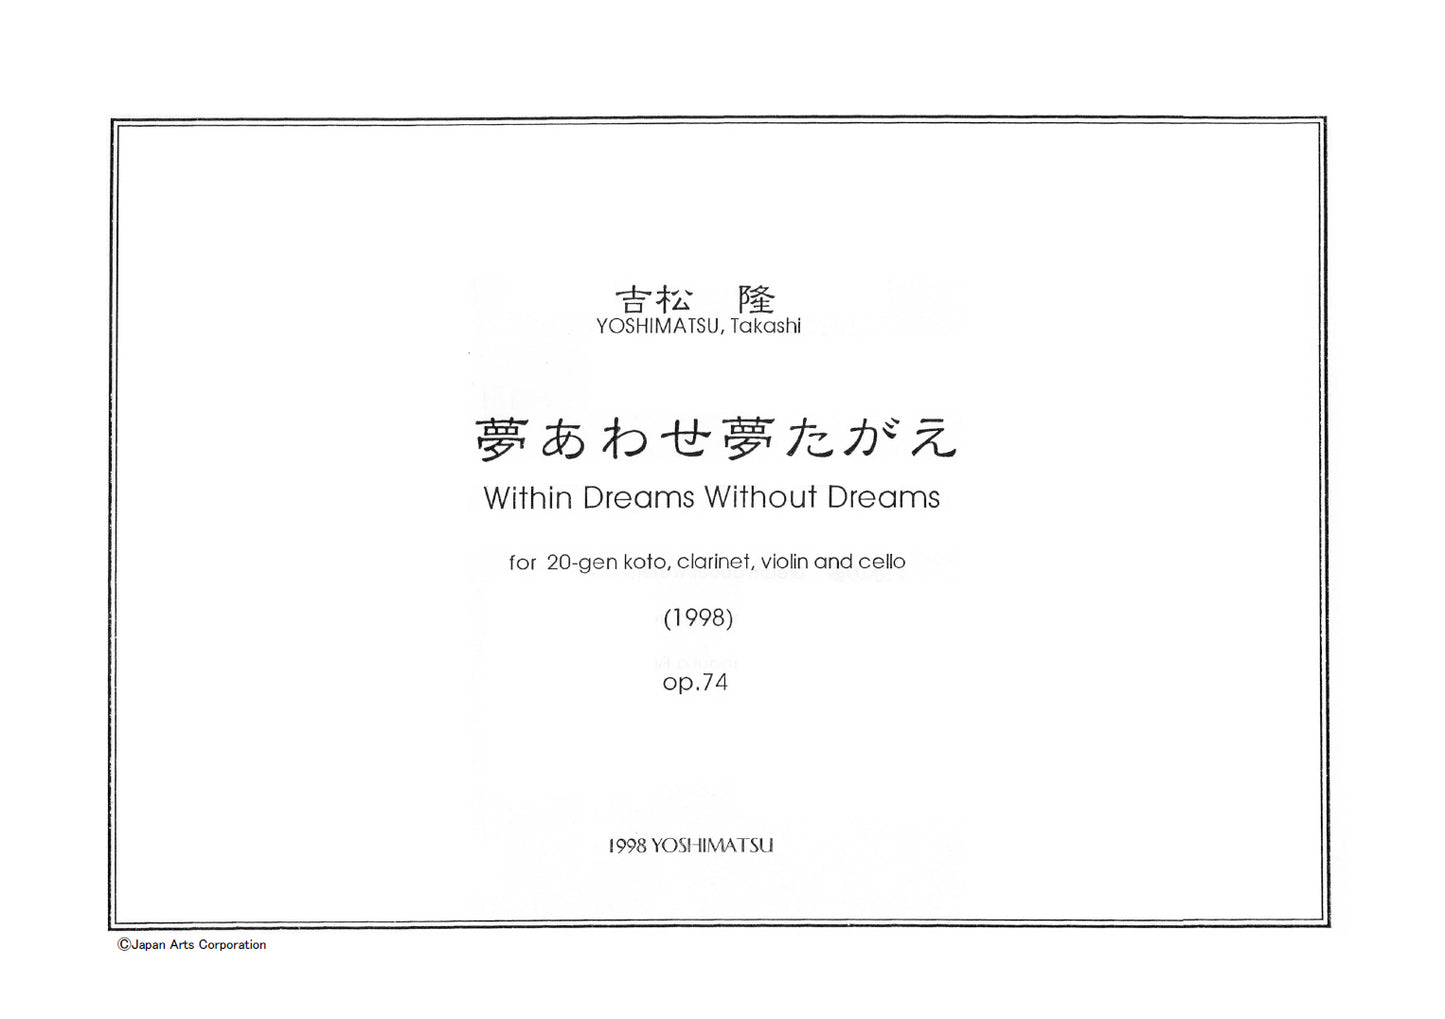 Within Dreams, Without Dreams op.74